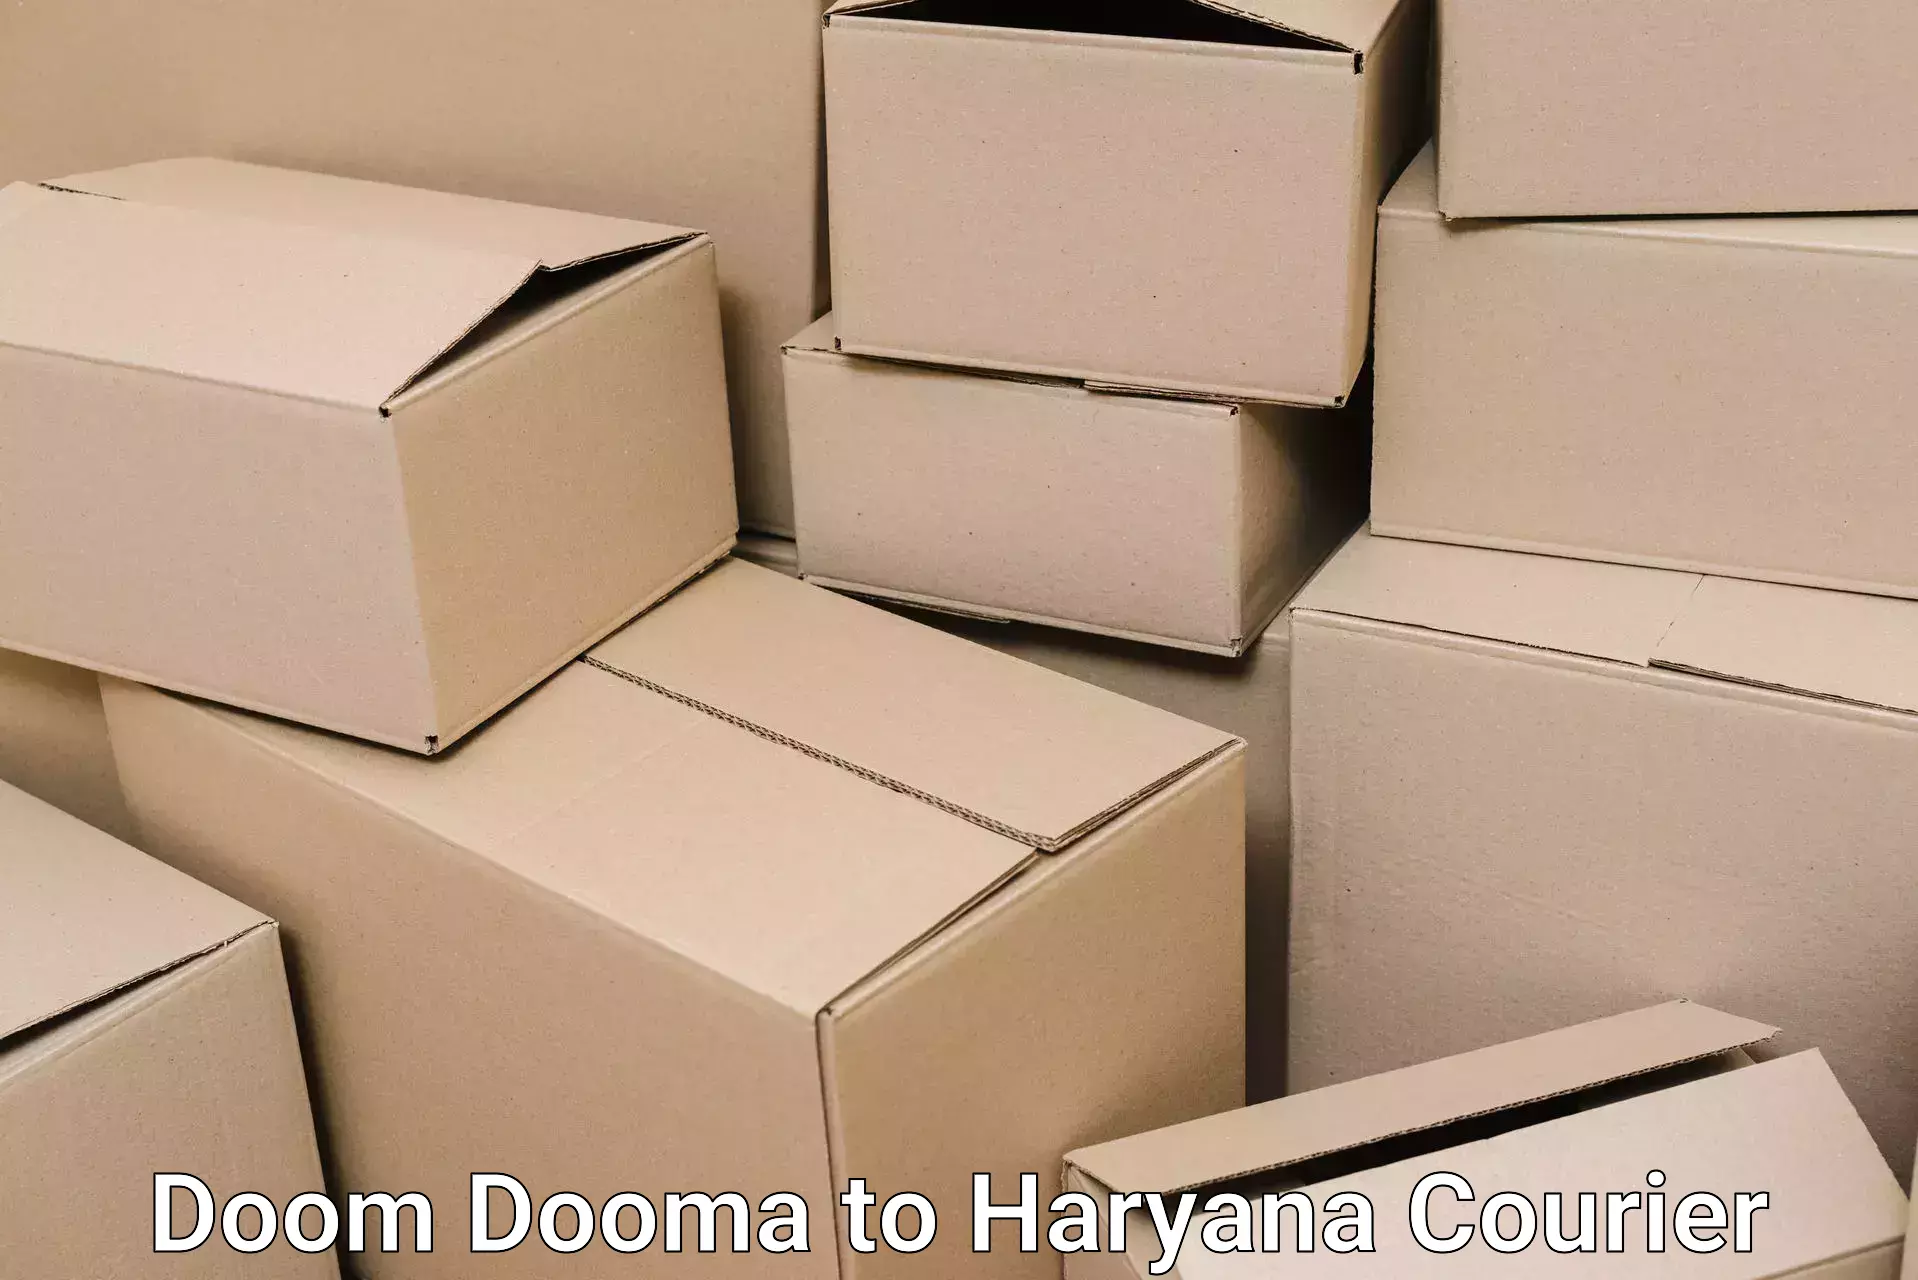 Efficient packing and moving Doom Dooma to Haryana